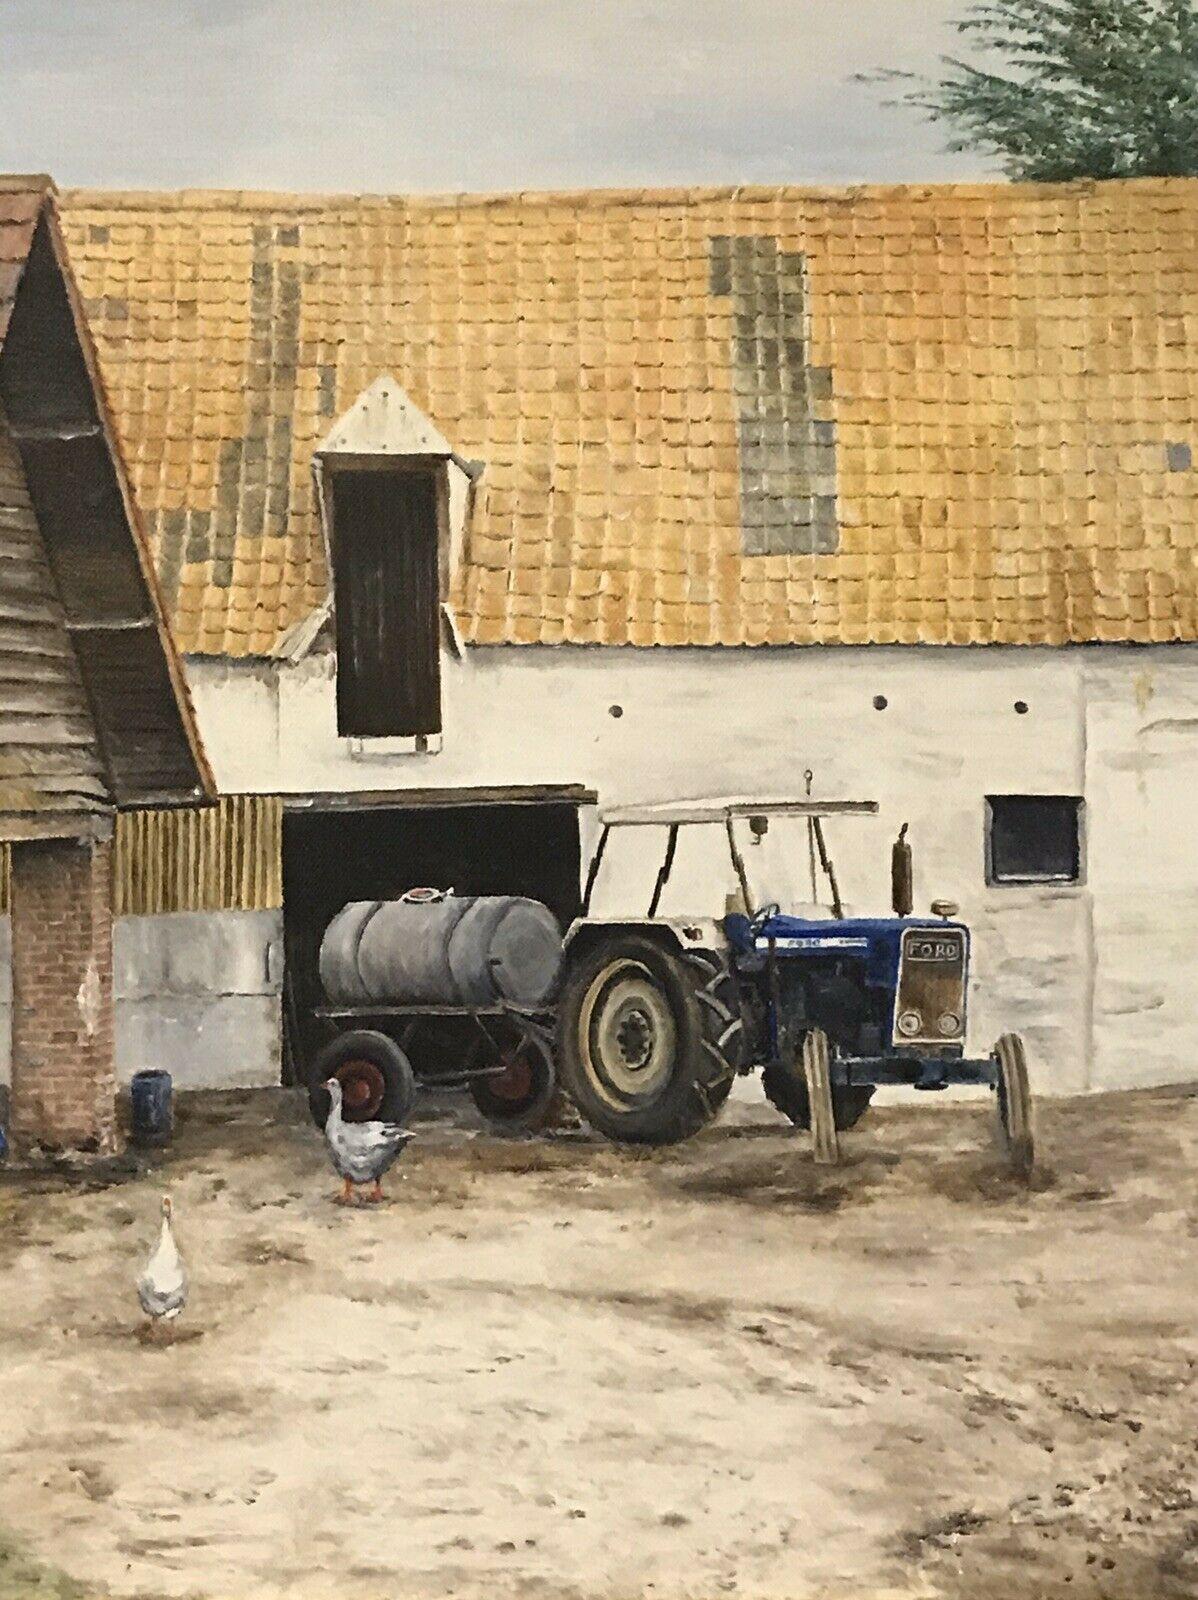 VINTAGE ENGLISH OIL PAINTING - FARMYARD BUILDINGS WITH TRACTOR & CHICKENS - Victorian Painting by Tommaso Principe